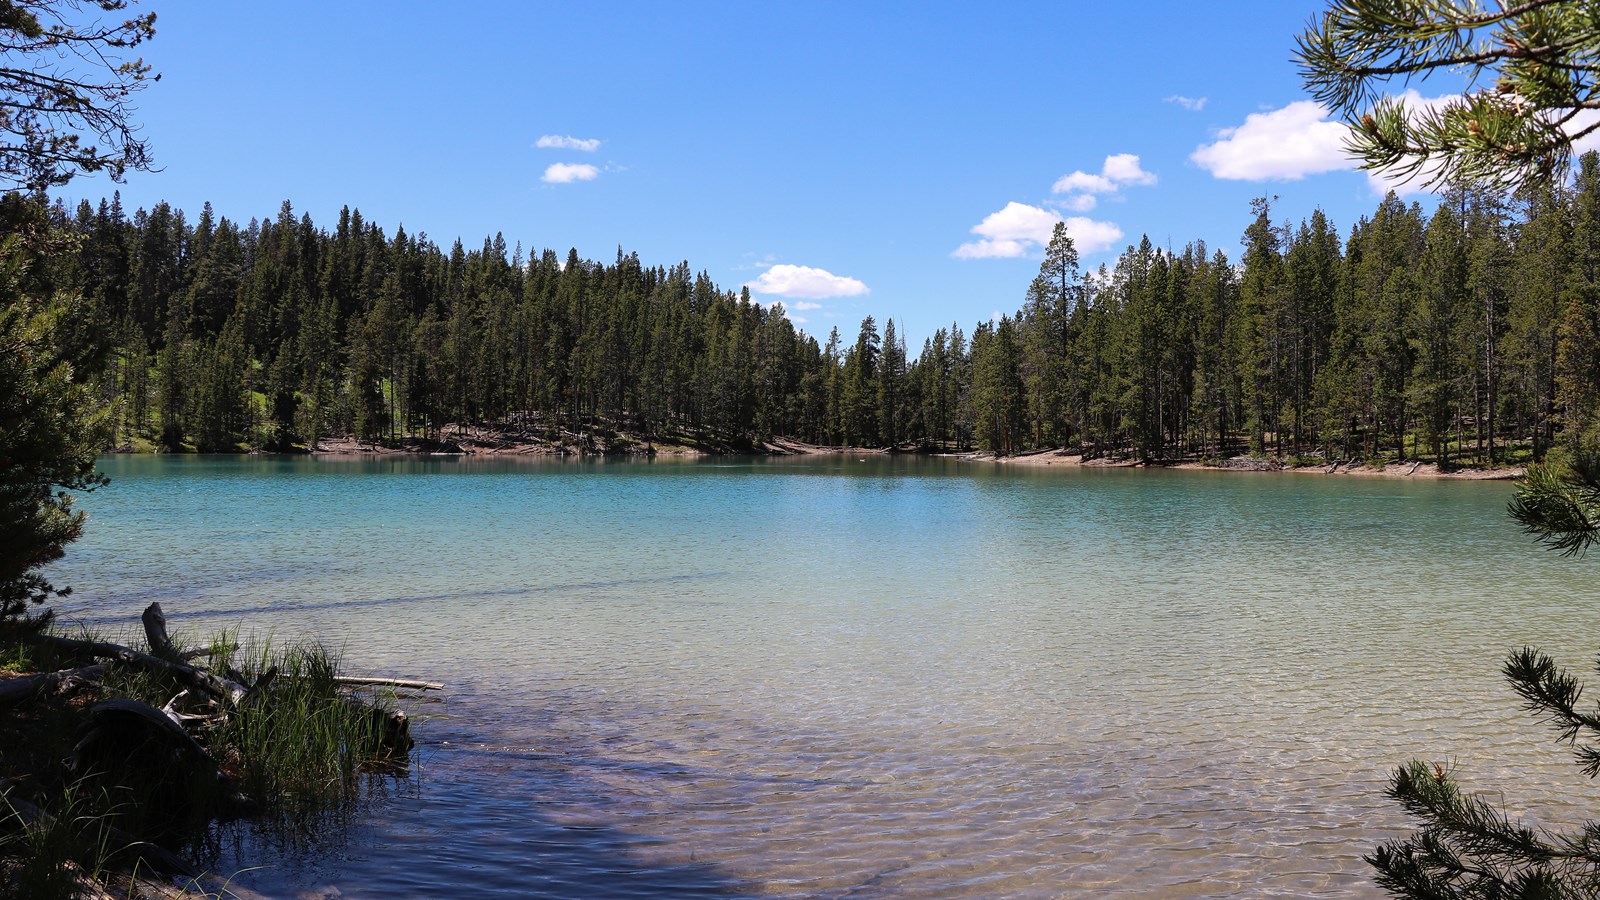 A turquoise blue lake surrounded by a forest.